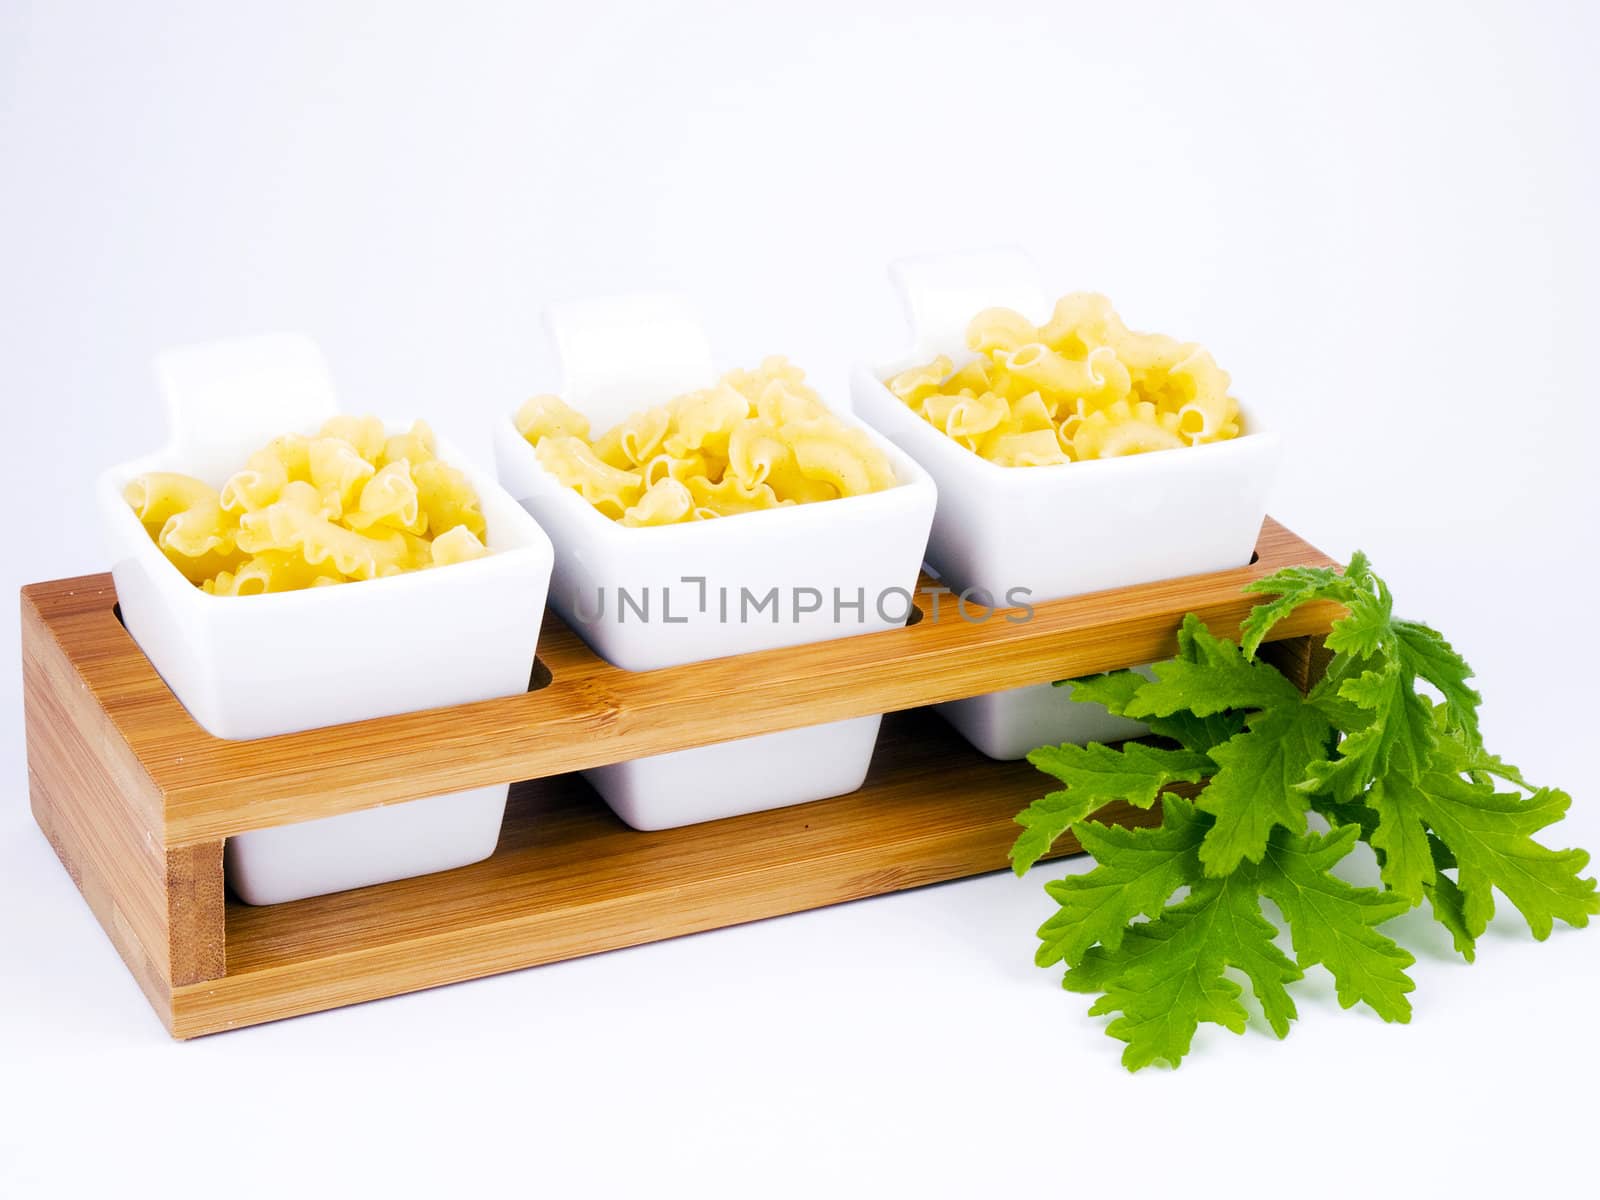 Three porceline bowls filled with pasta on white background